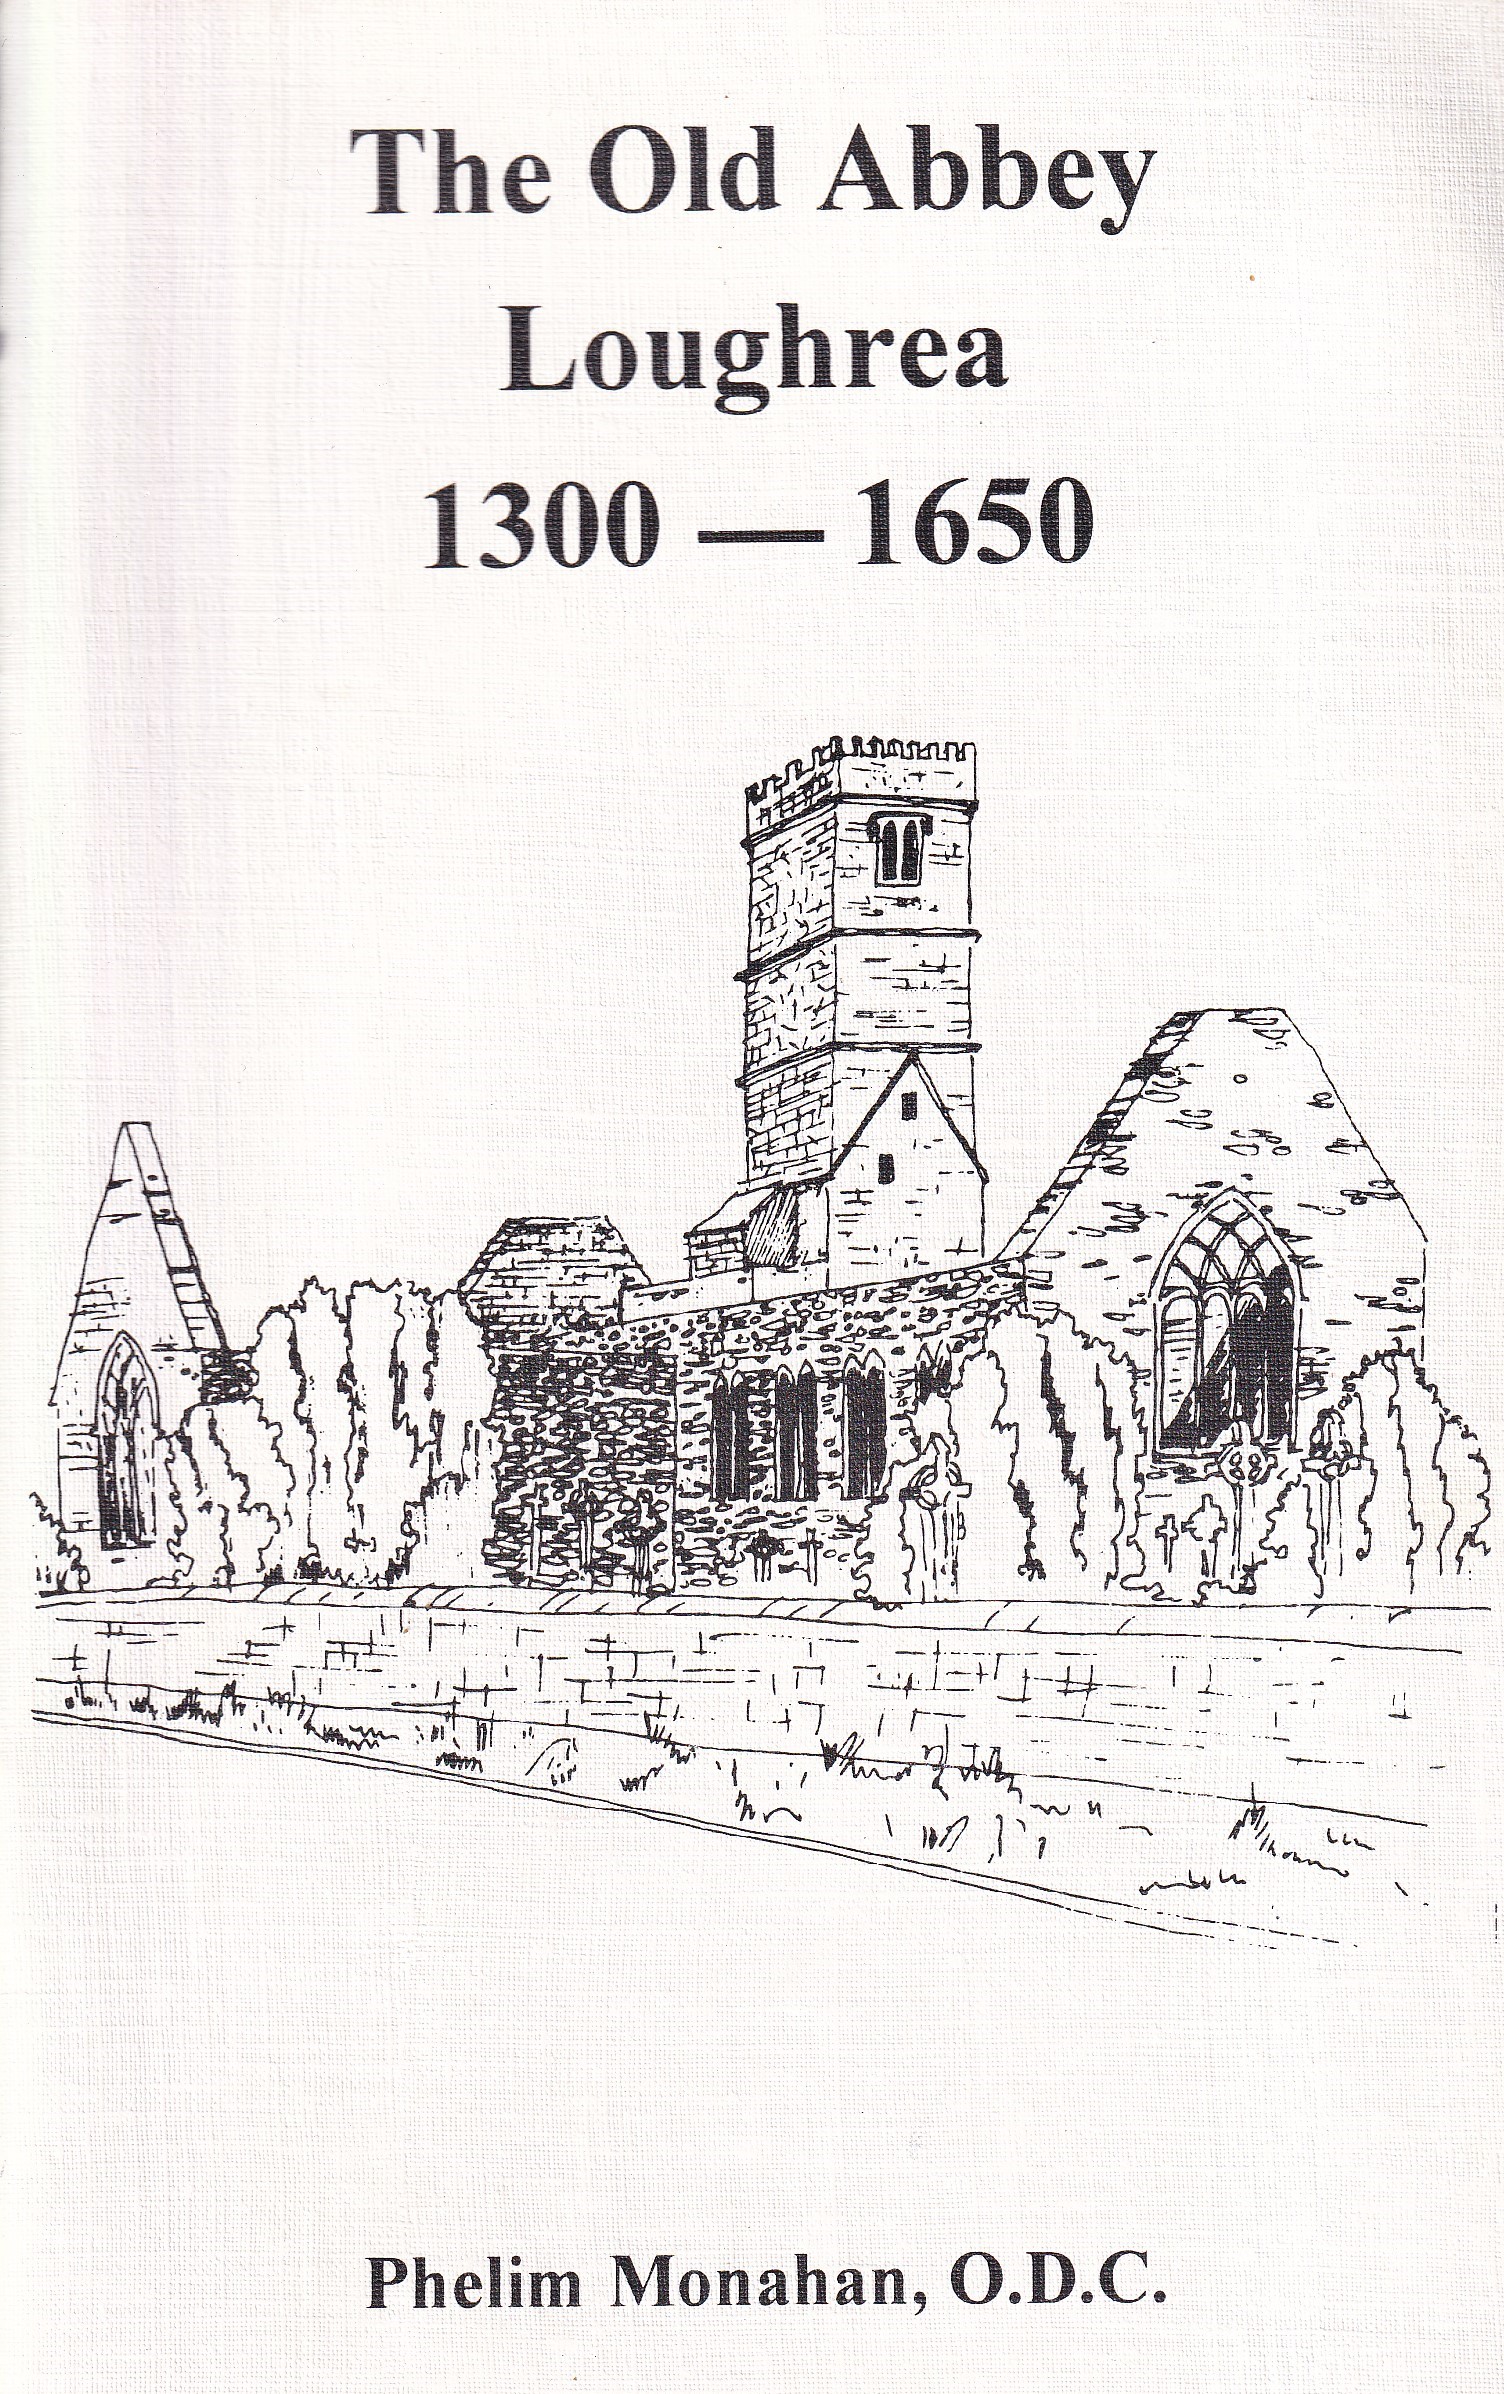 The Old Abbey, Loughrea 1300-1650 by Phelim Monahan